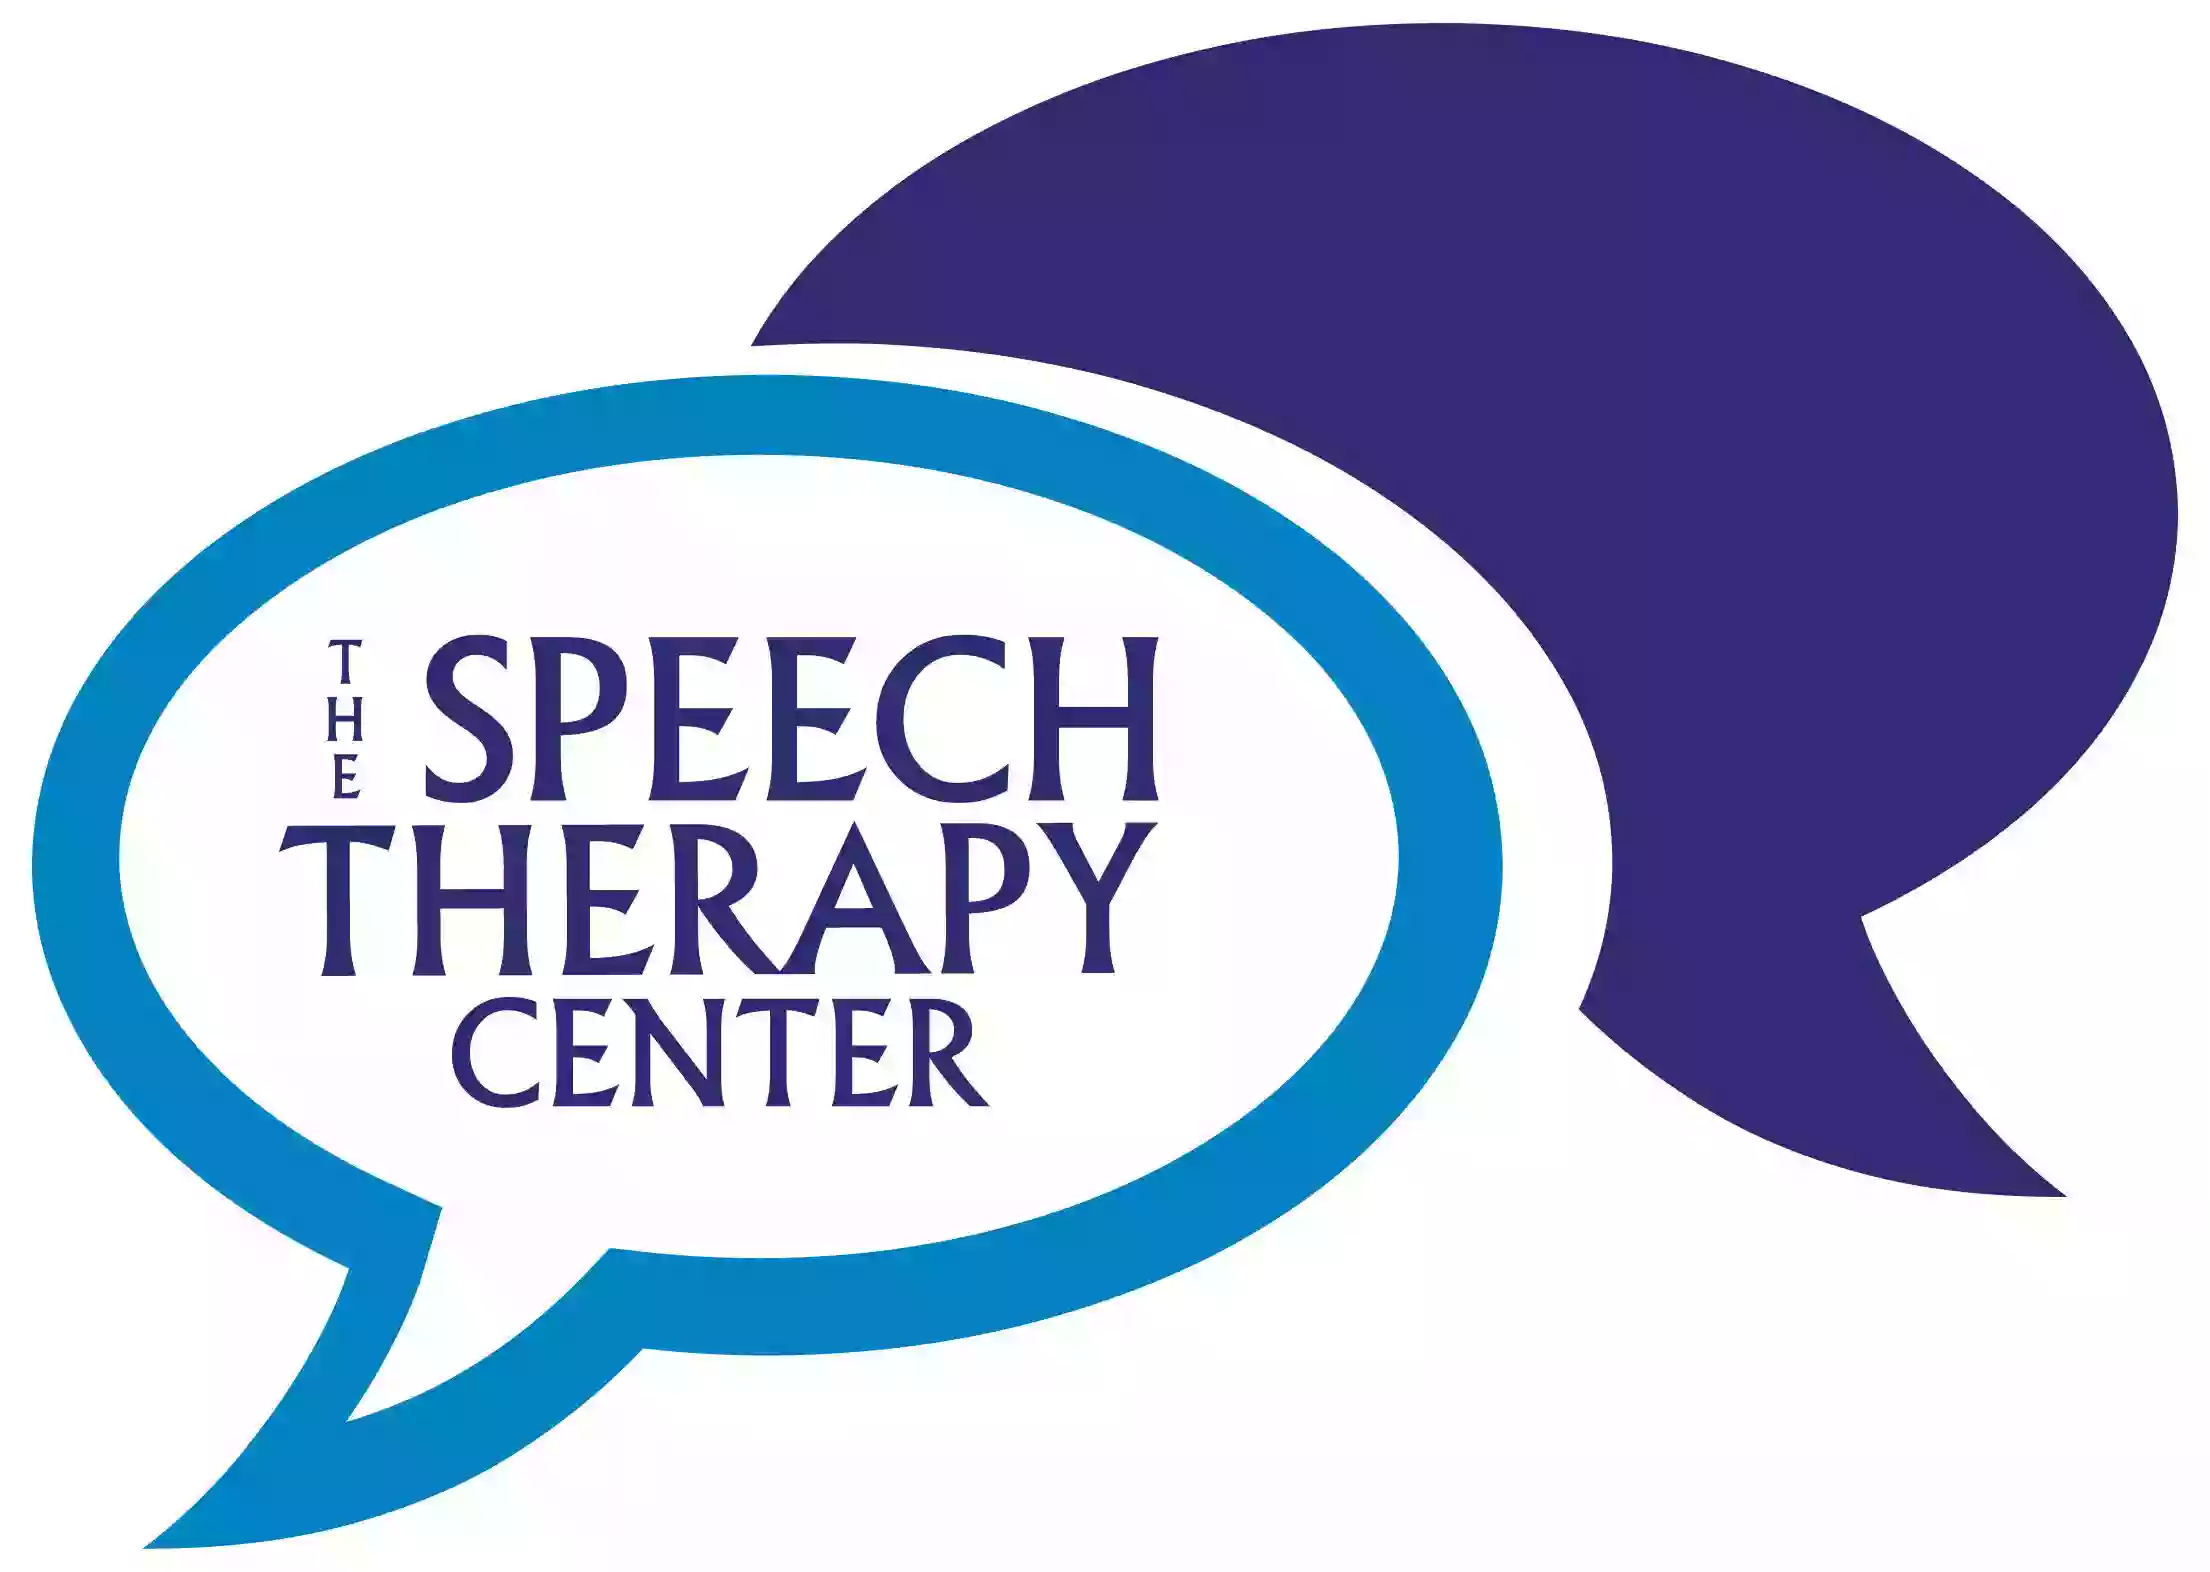 The Speech Therapy Center